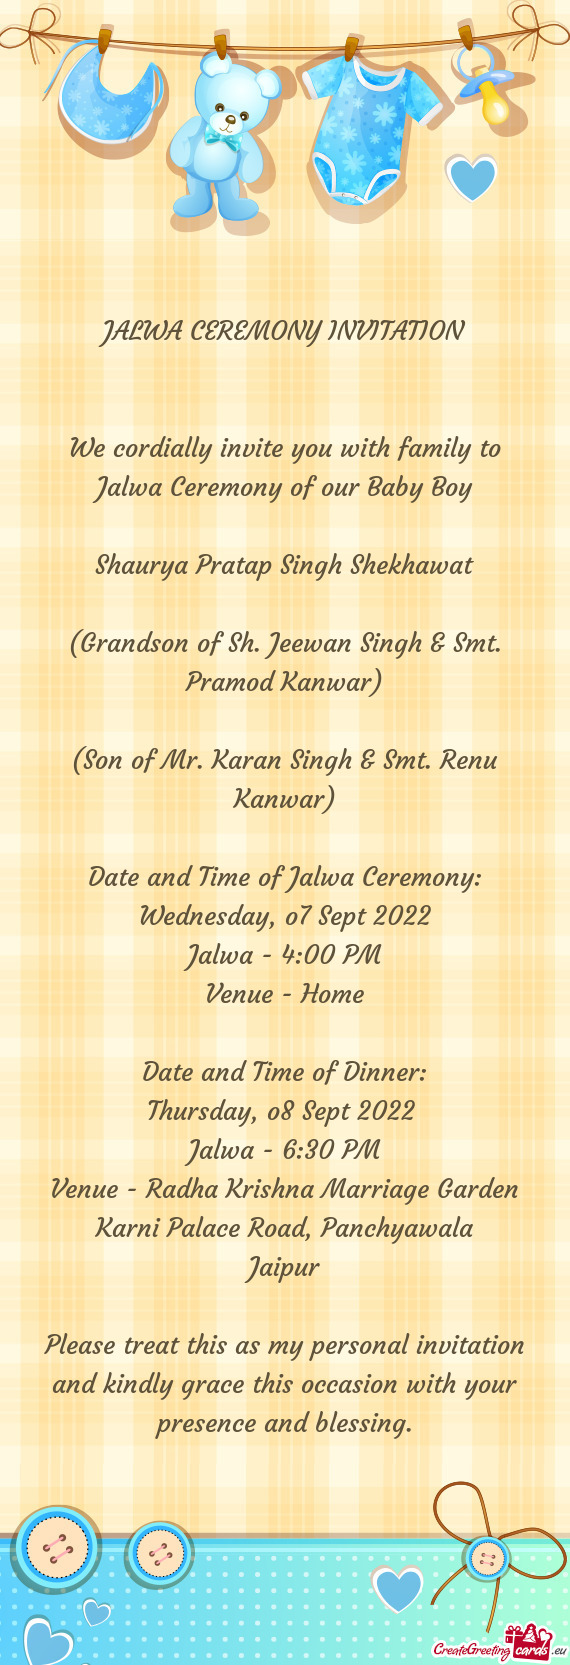 We cordially invite you with family to Jalwa Ceremony of our Baby Boy